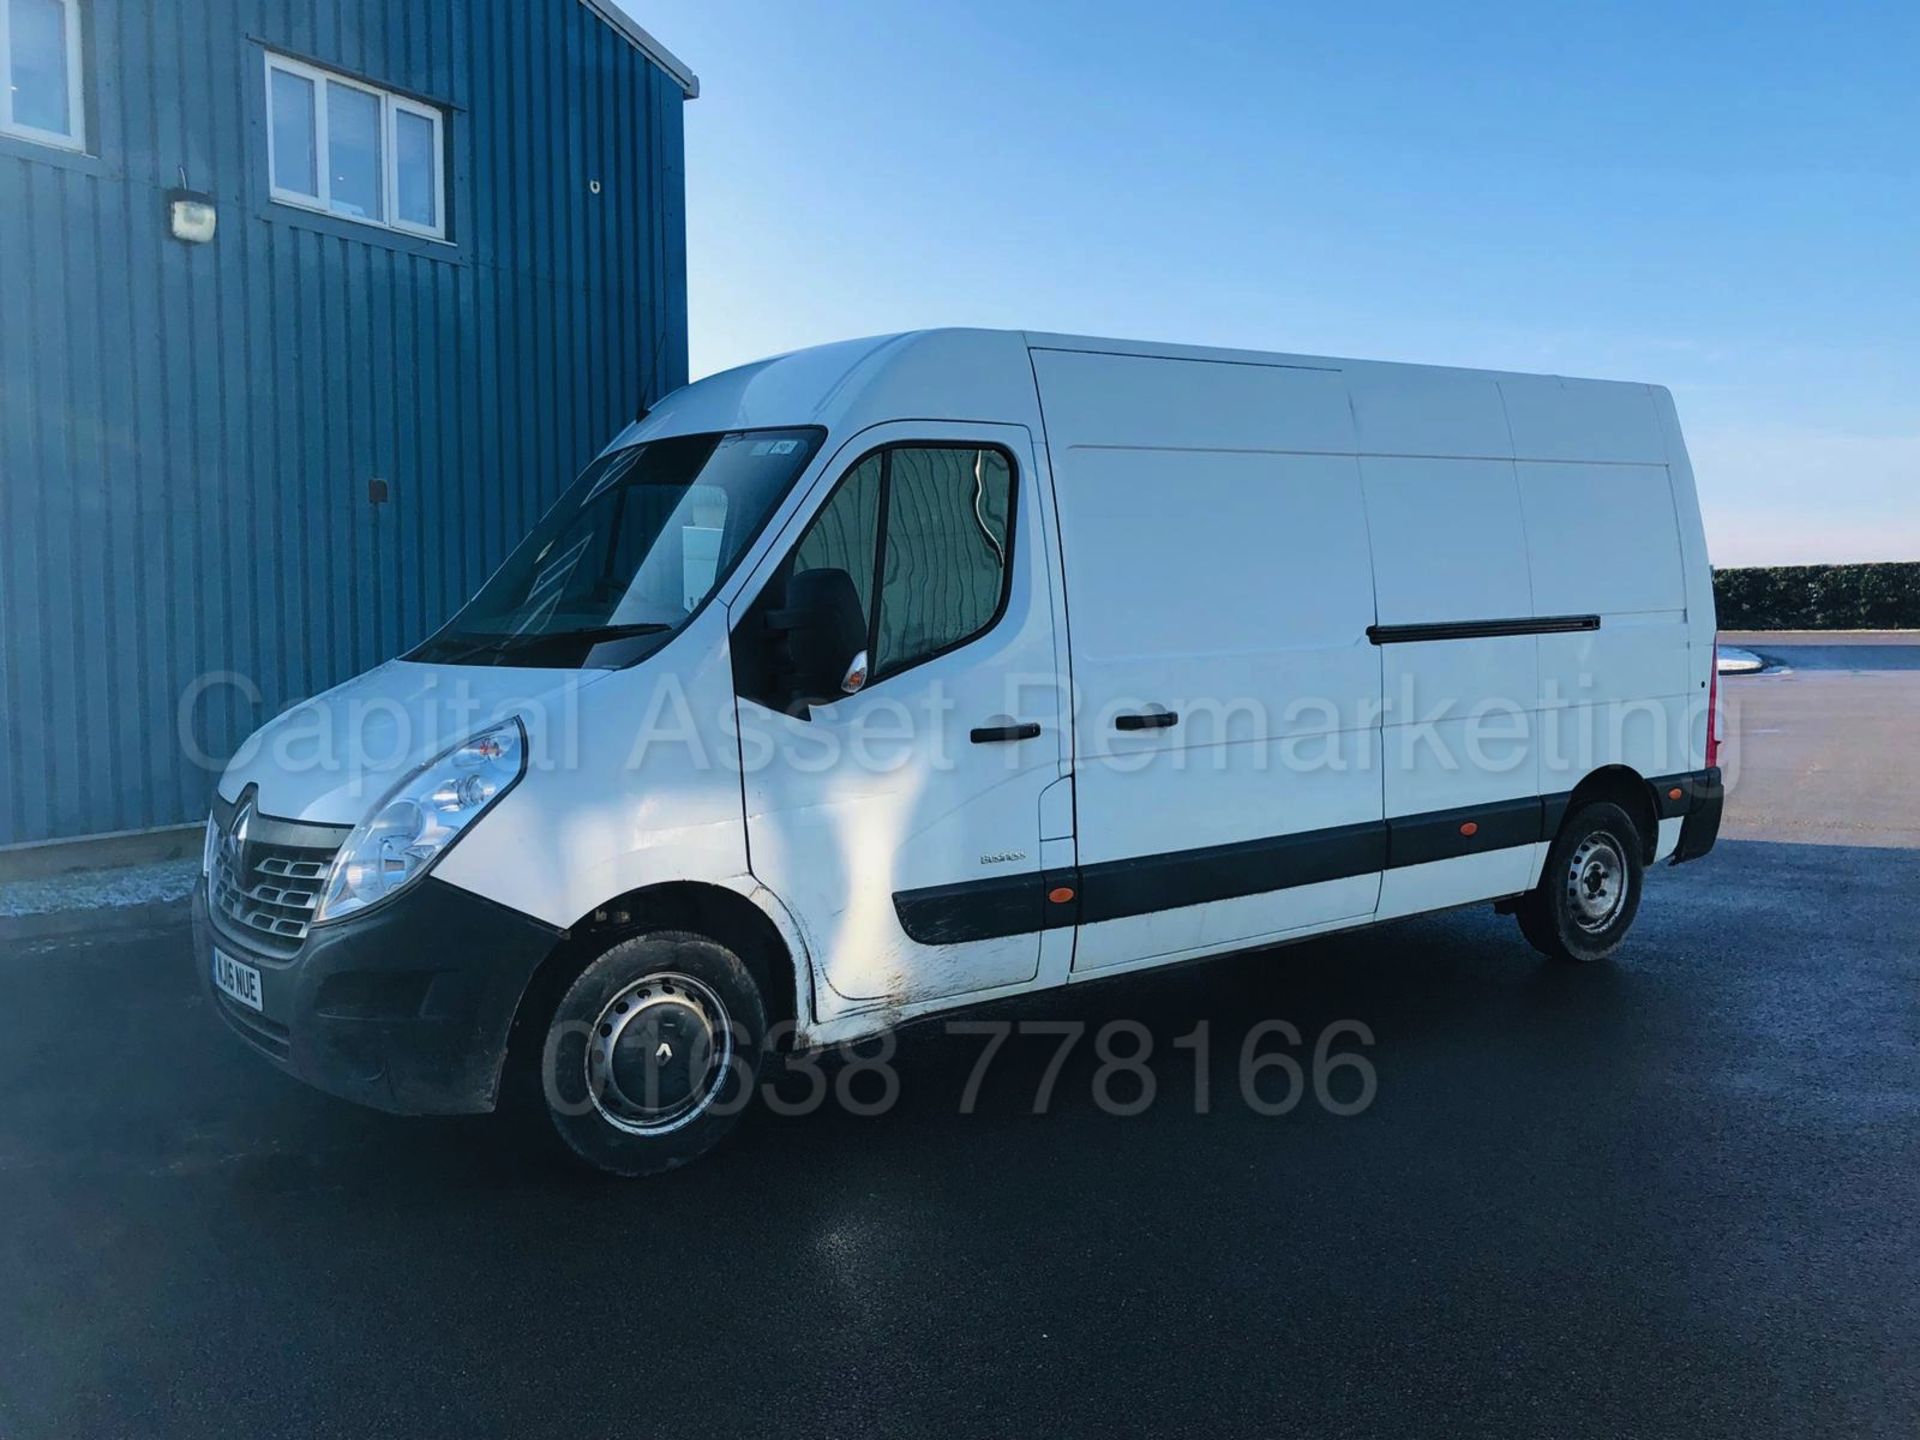 RENAULT MASTER LM35 *LWB - BUSINESS EDITION* (2016) '2.3 DCI - 110 BHP - 6 SPEED' *ULTRA LOW MILES* - Image 4 of 23